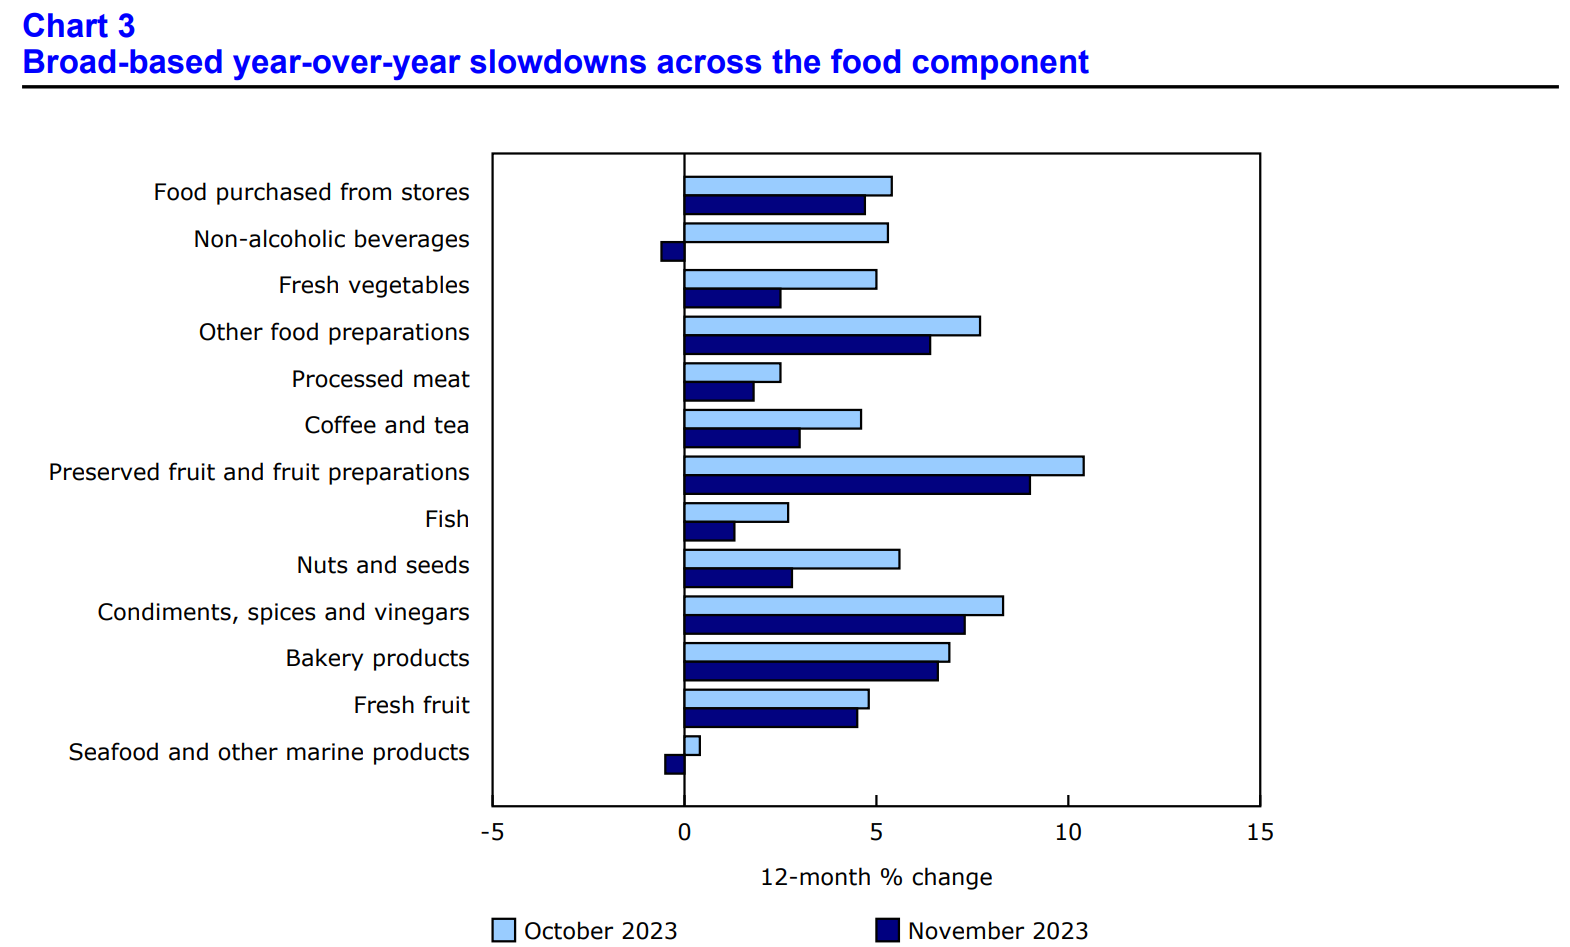 CPI price chart depicting broad price declines in the food index in November 2023 